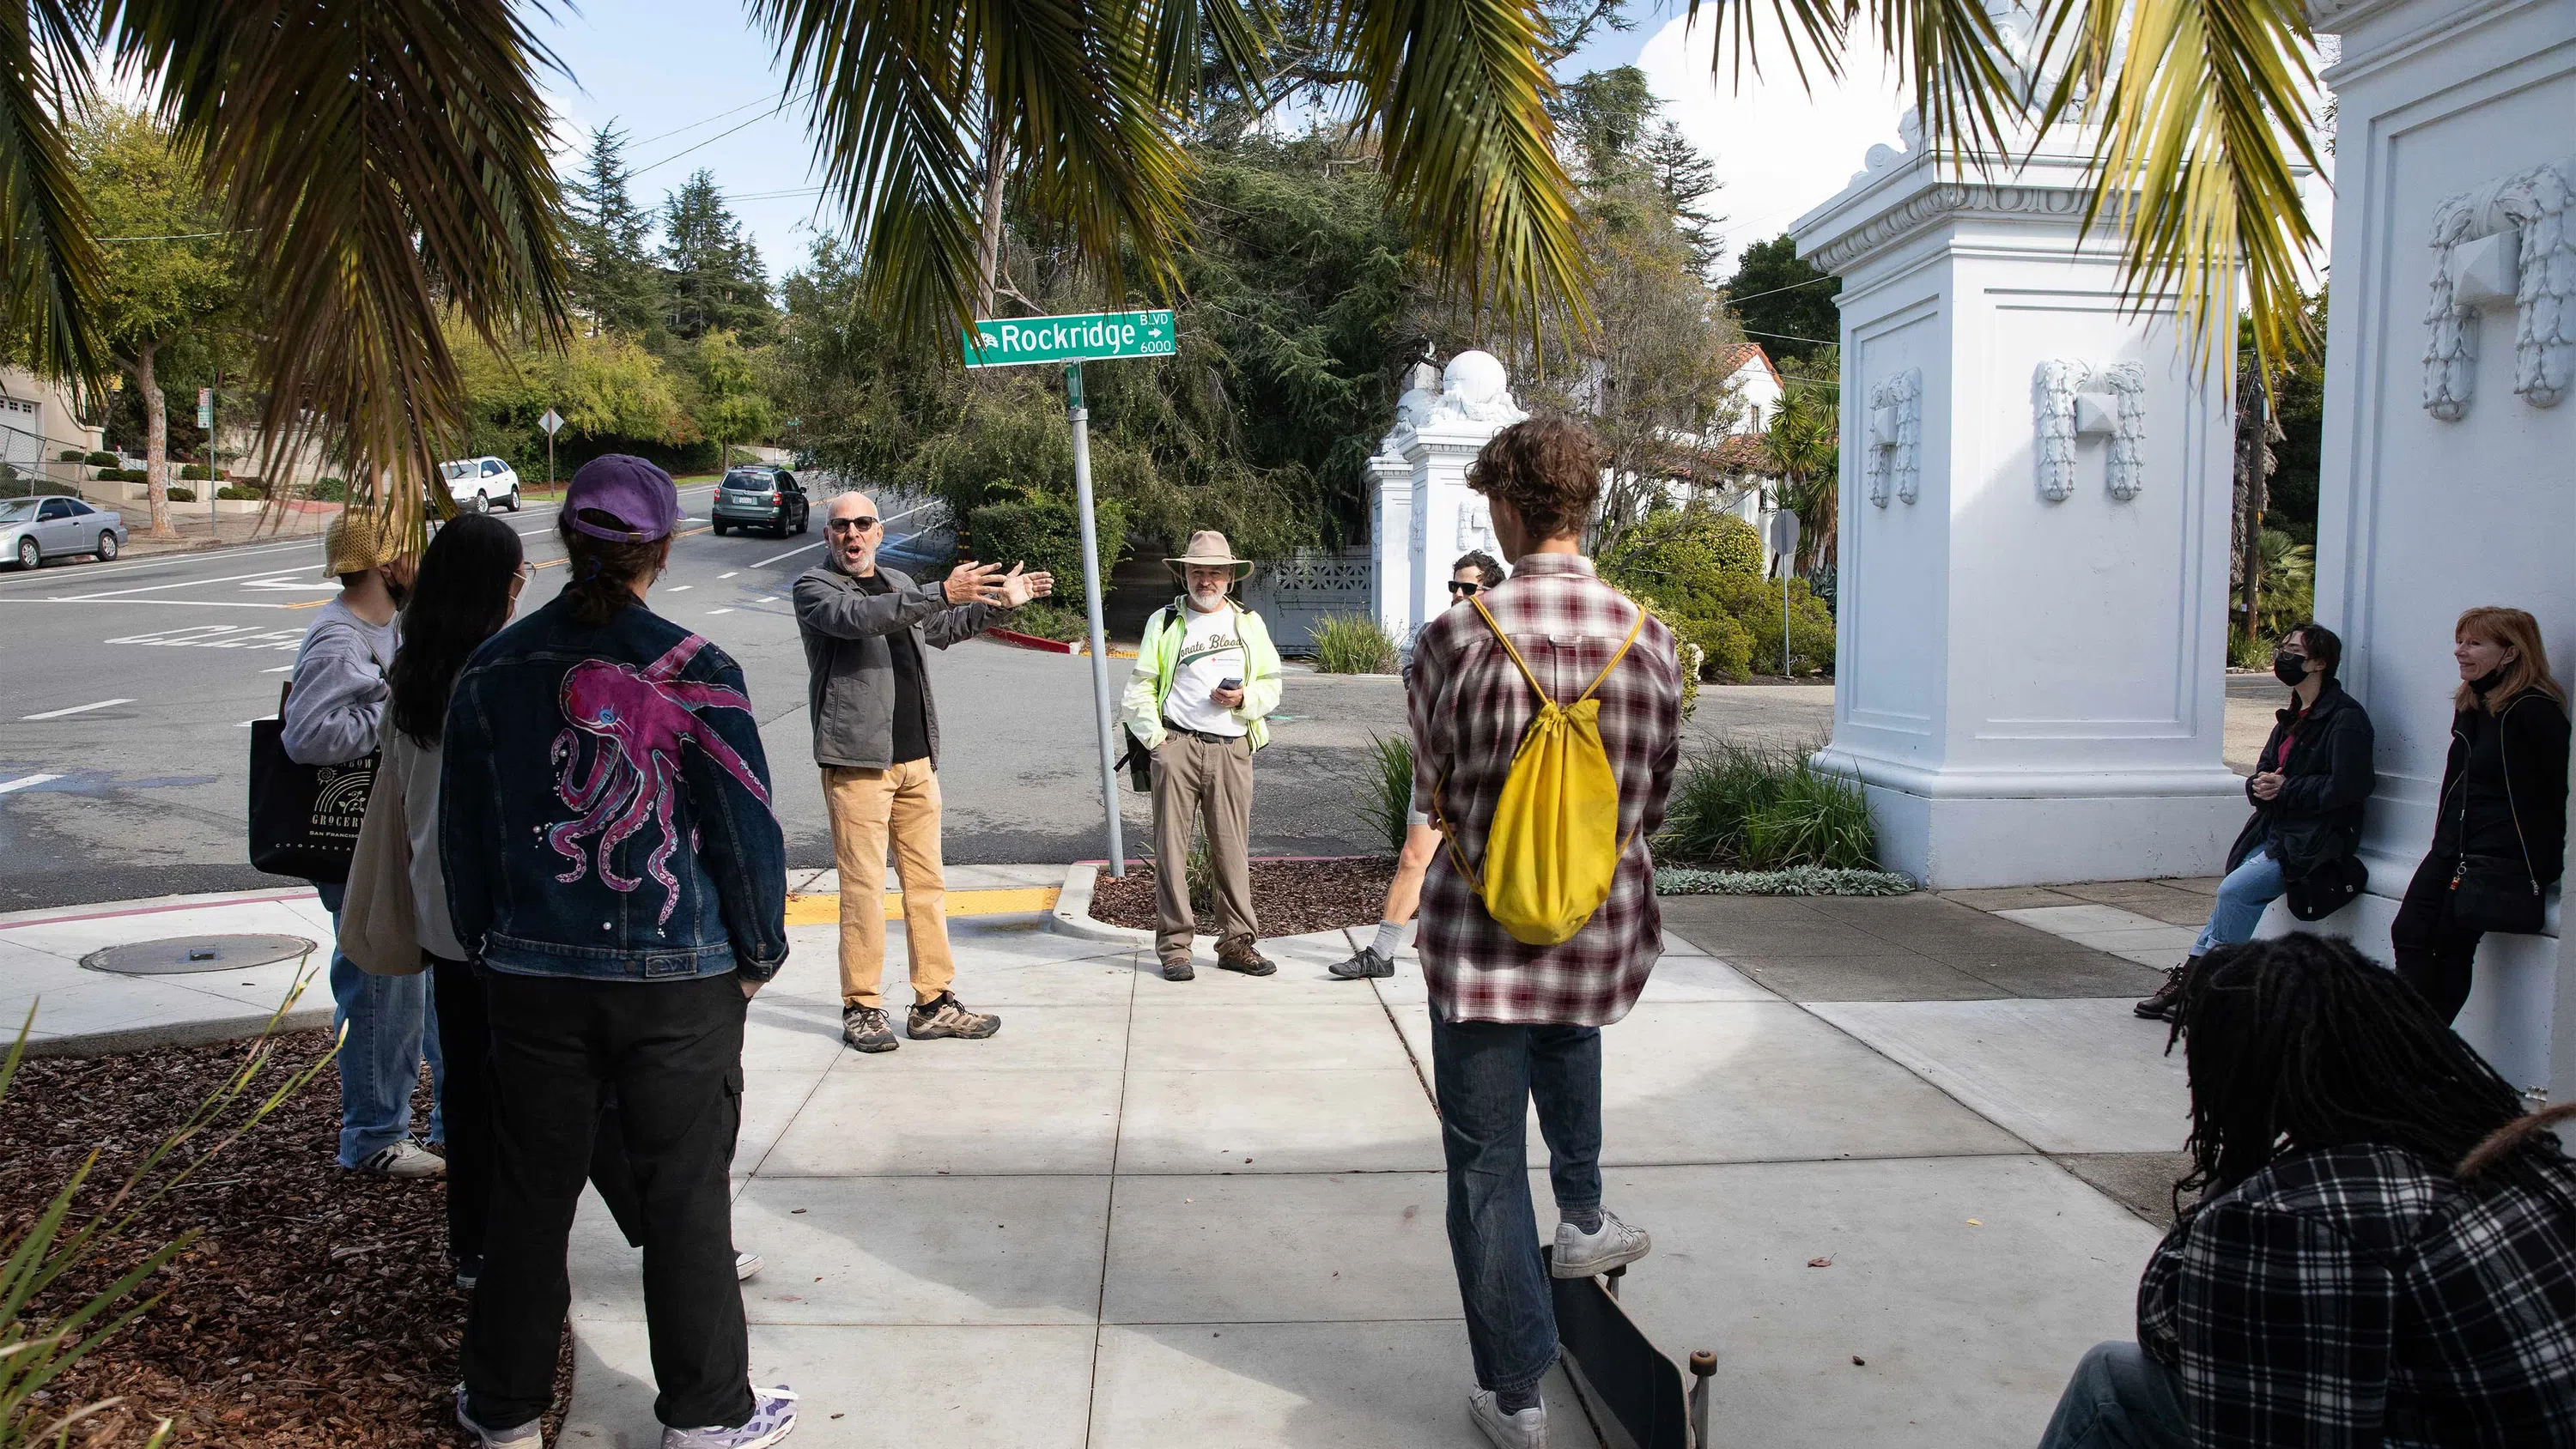 A professor gestures and talks to a small group standing on the corner near a green street sign that says Rockridge.